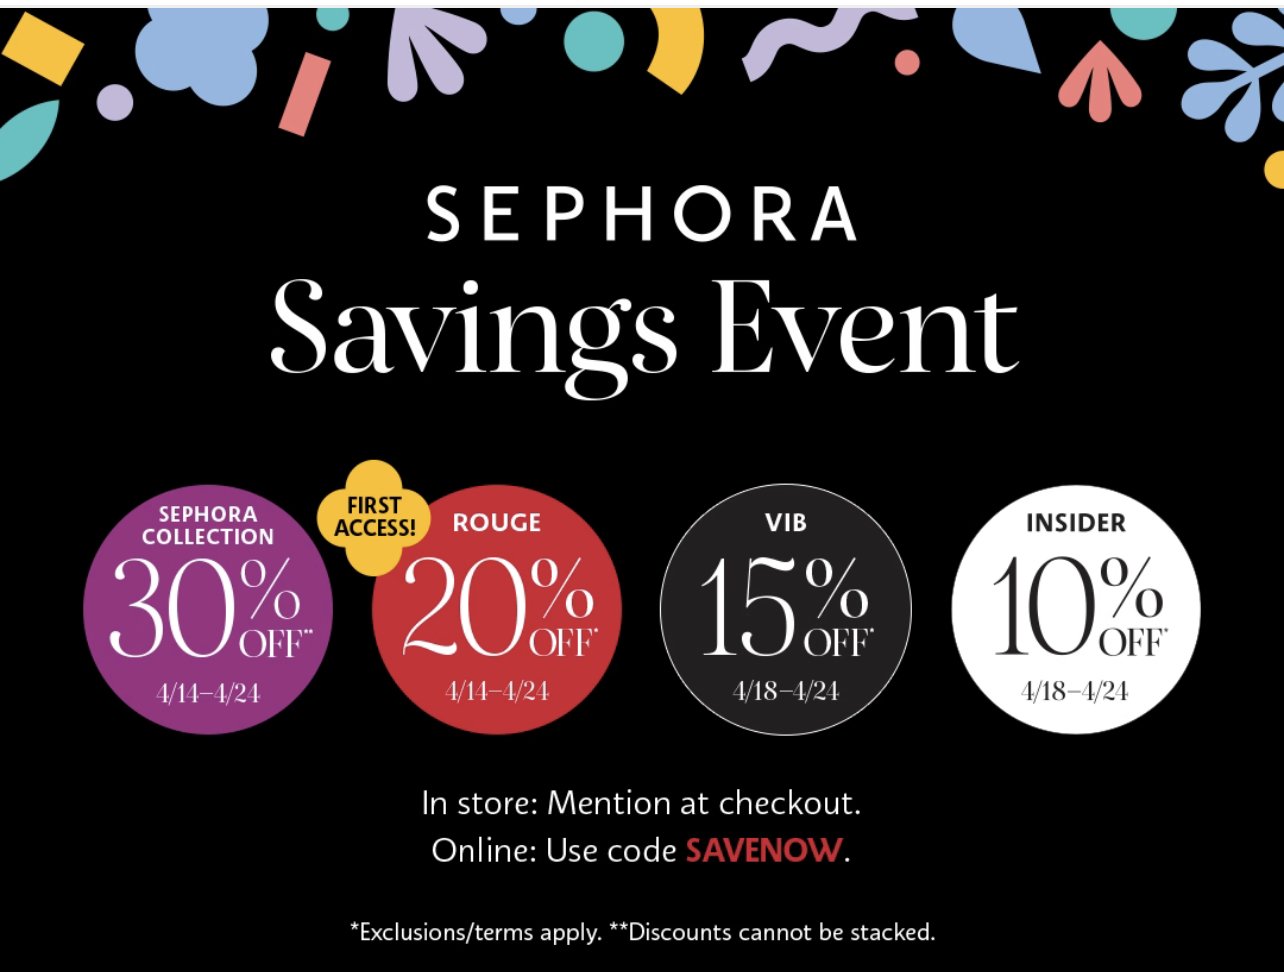 20 Top-Rated Sephora Products to Buy During the Spring Savings Event